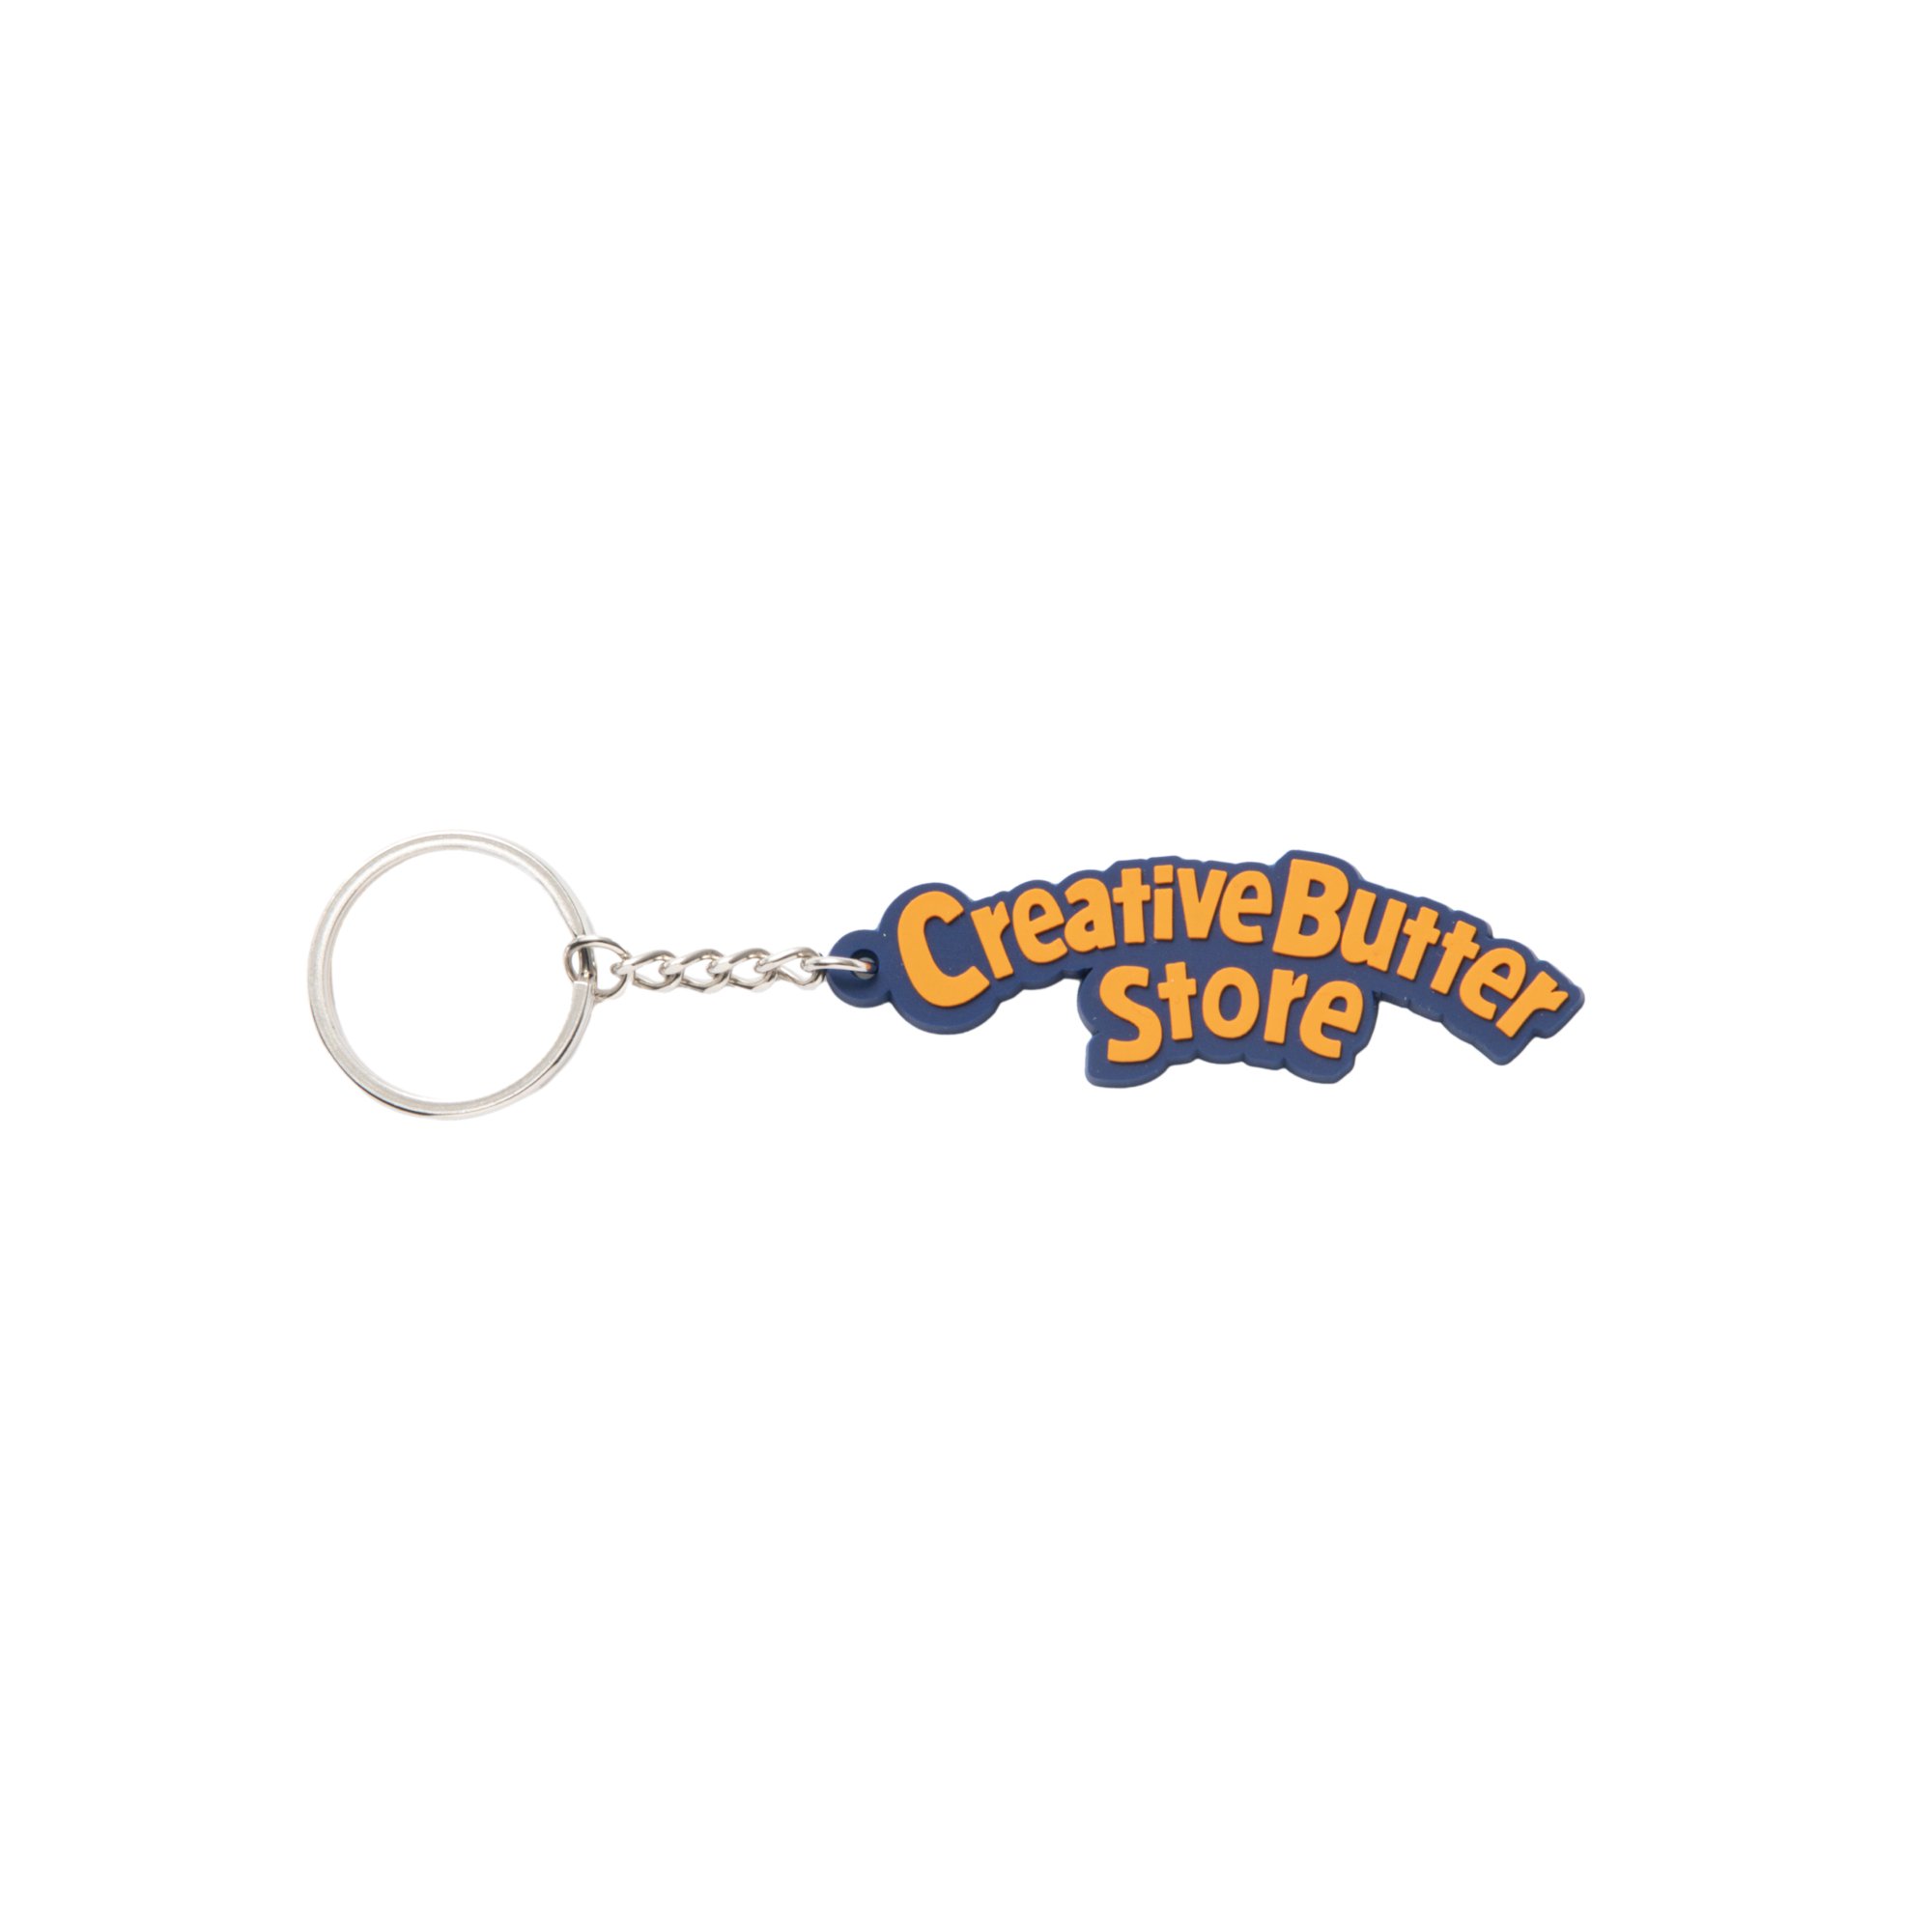 CREATIVE DRUG STORE  APPLE BUTTER STORE <br>CBS KEY CHAIN<br>